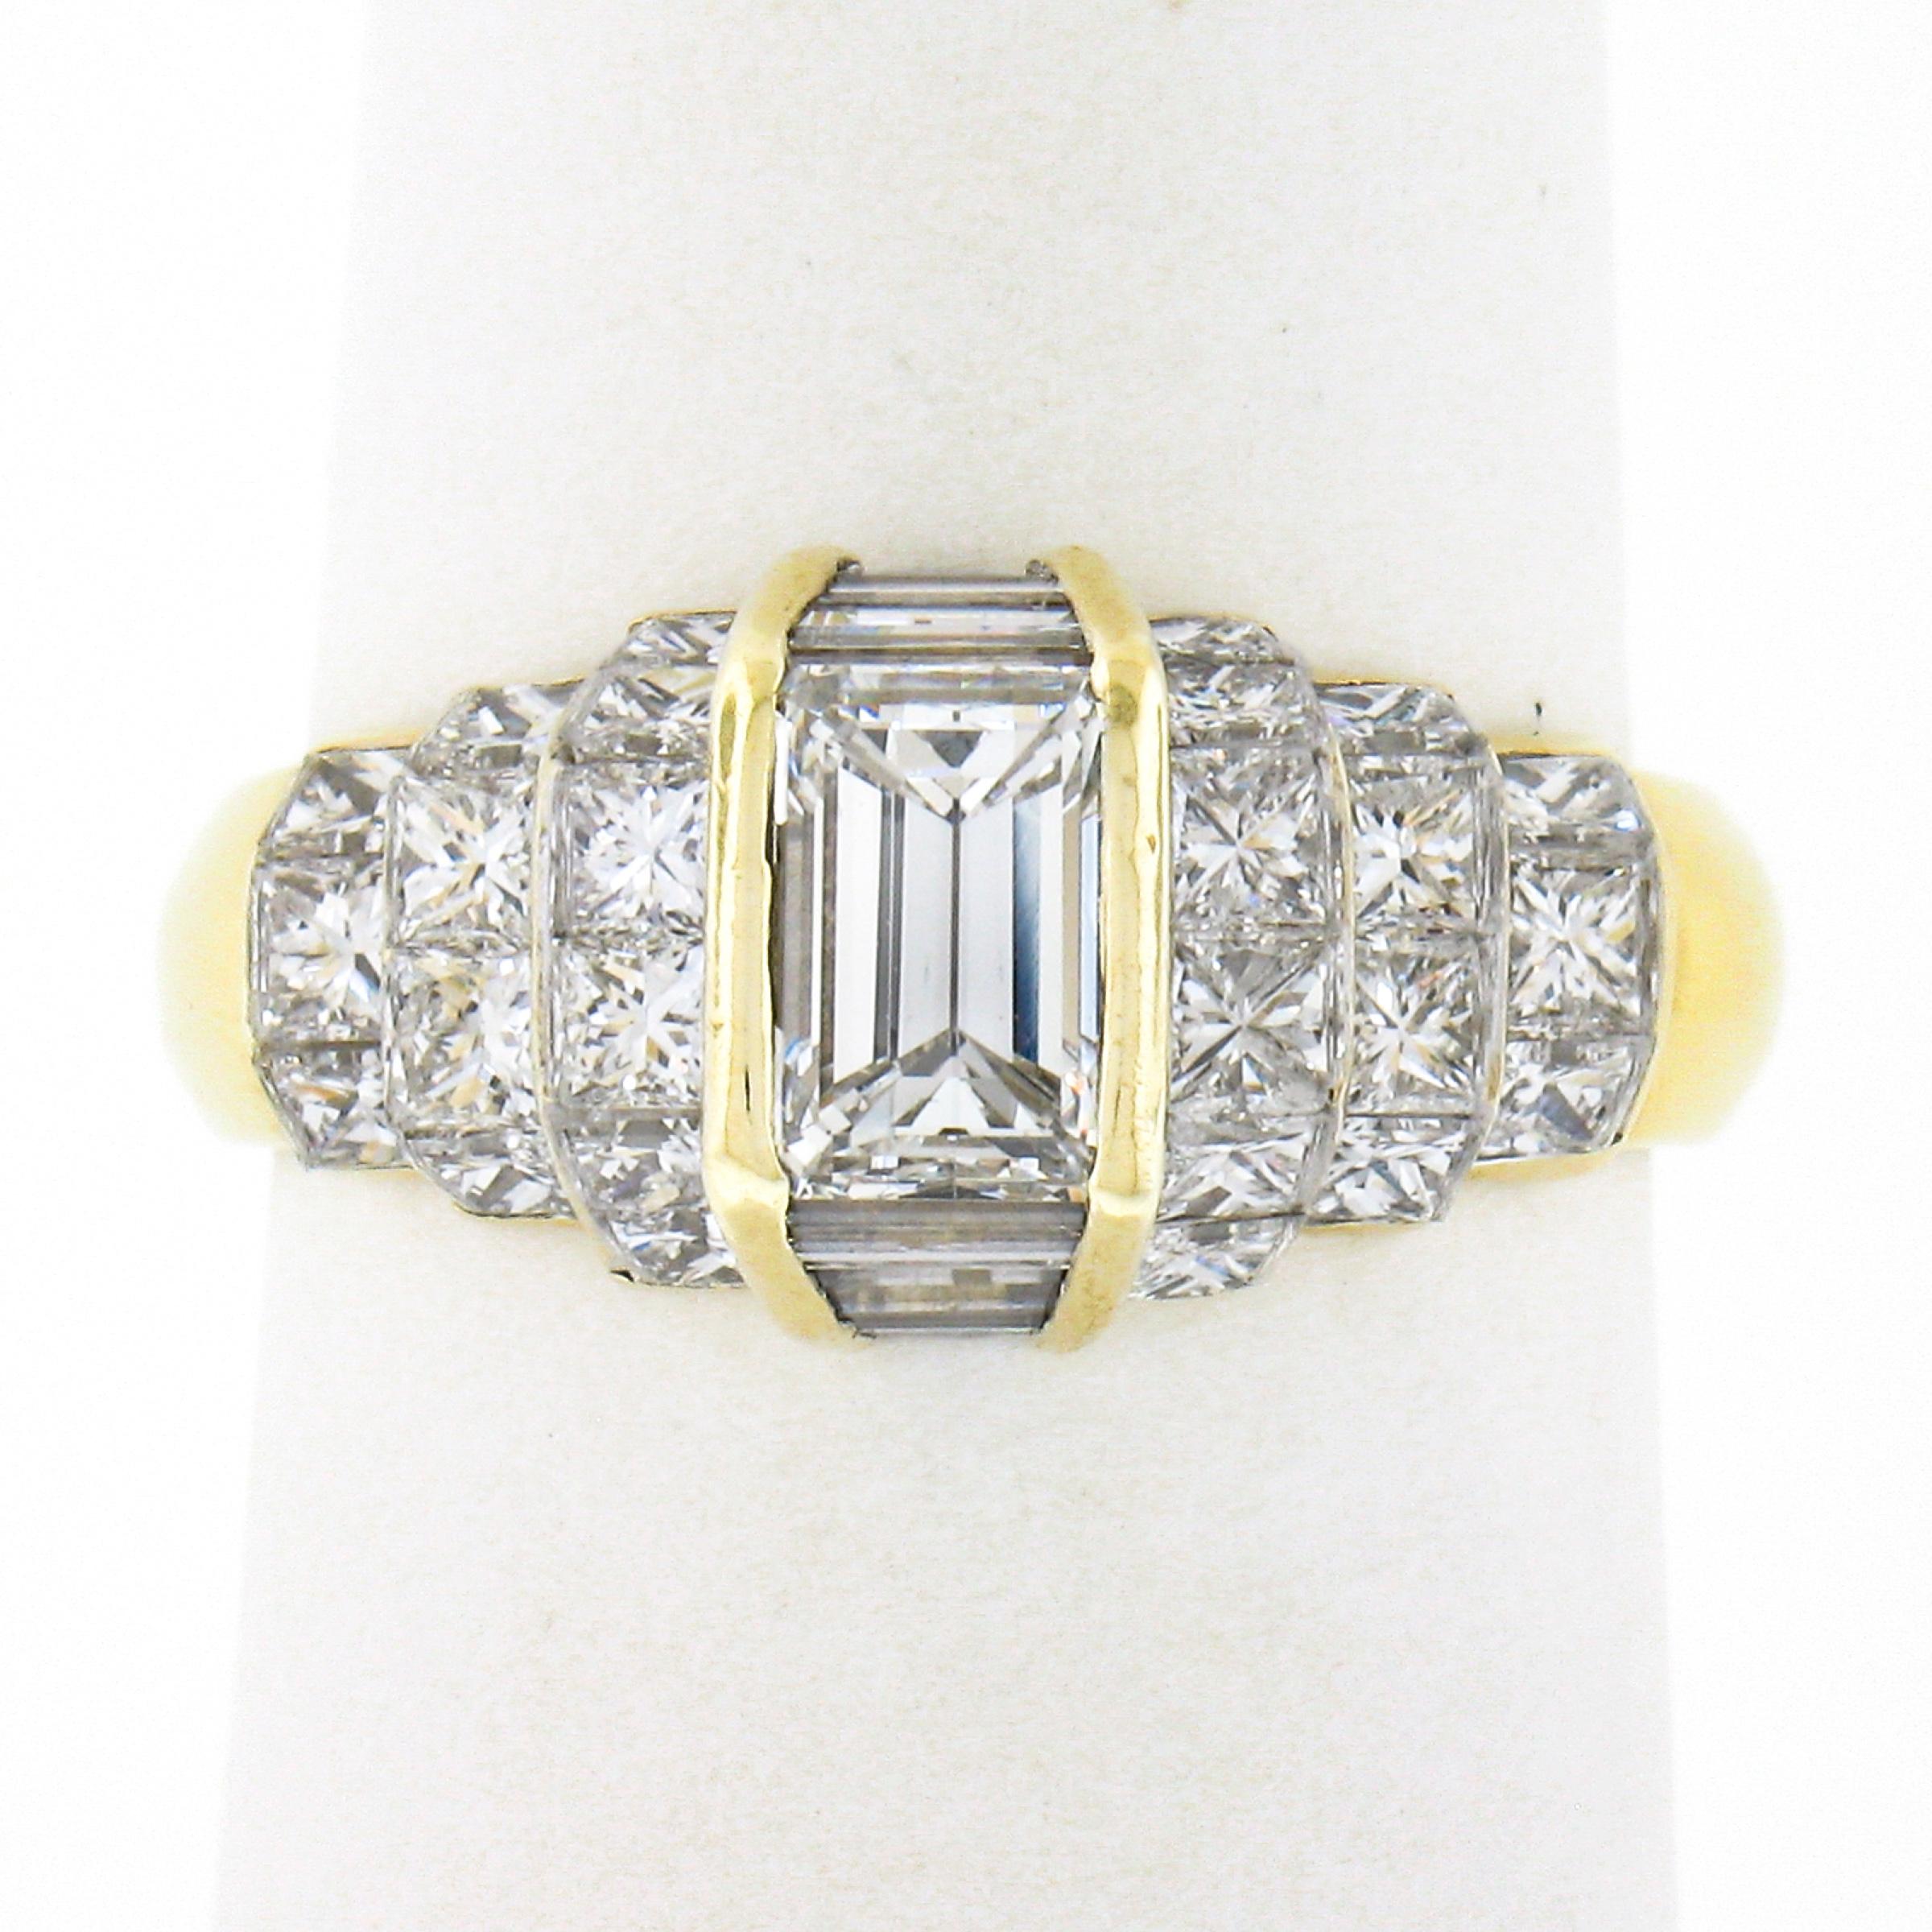 This stunning and uniquely designed diamond ring is designed by Quadrillion and crafted in solid 18k yellow gold. It features a VERY FINE quality emerald cut diamond solitaire that is neatly channel set at the top of the rings' elegant pyramid style